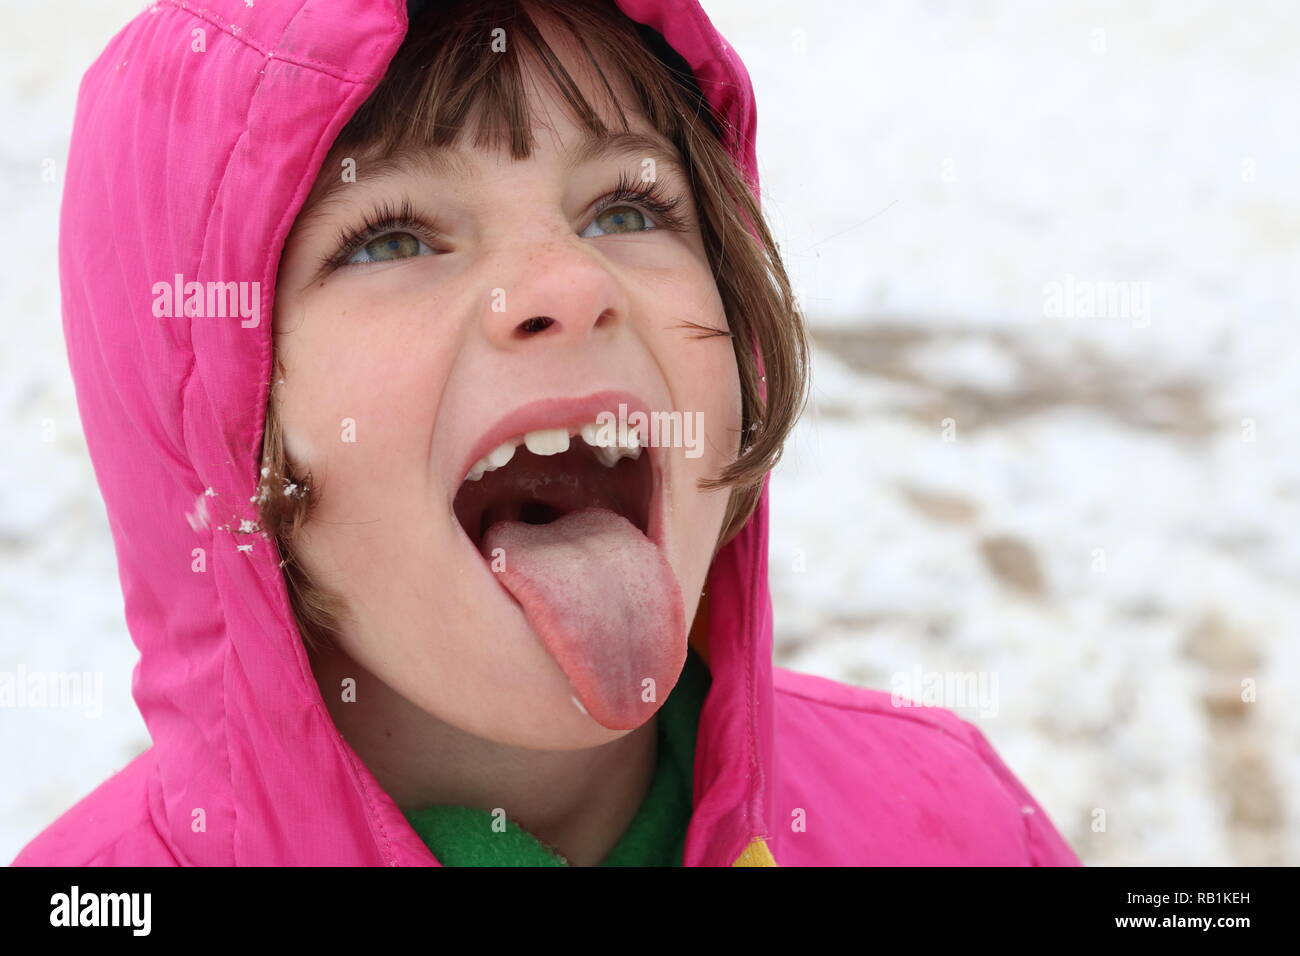 Portrait of a young girl in the snow trying to catch a snowflake on her tongue Stock Photo